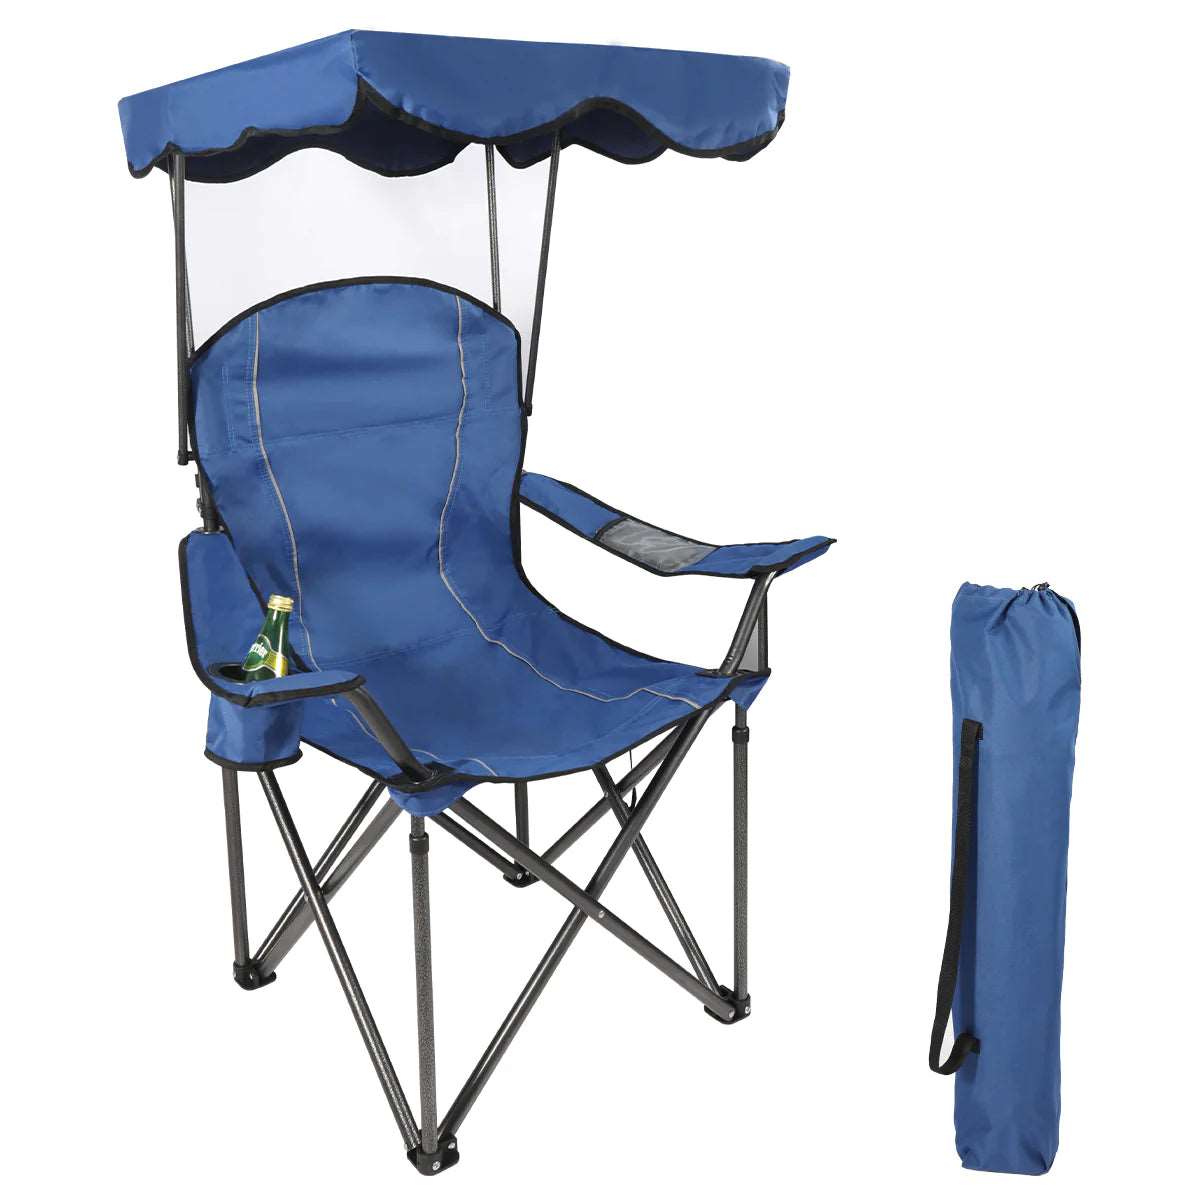 Oversized Folding Camping Chairs with Canopy Shade